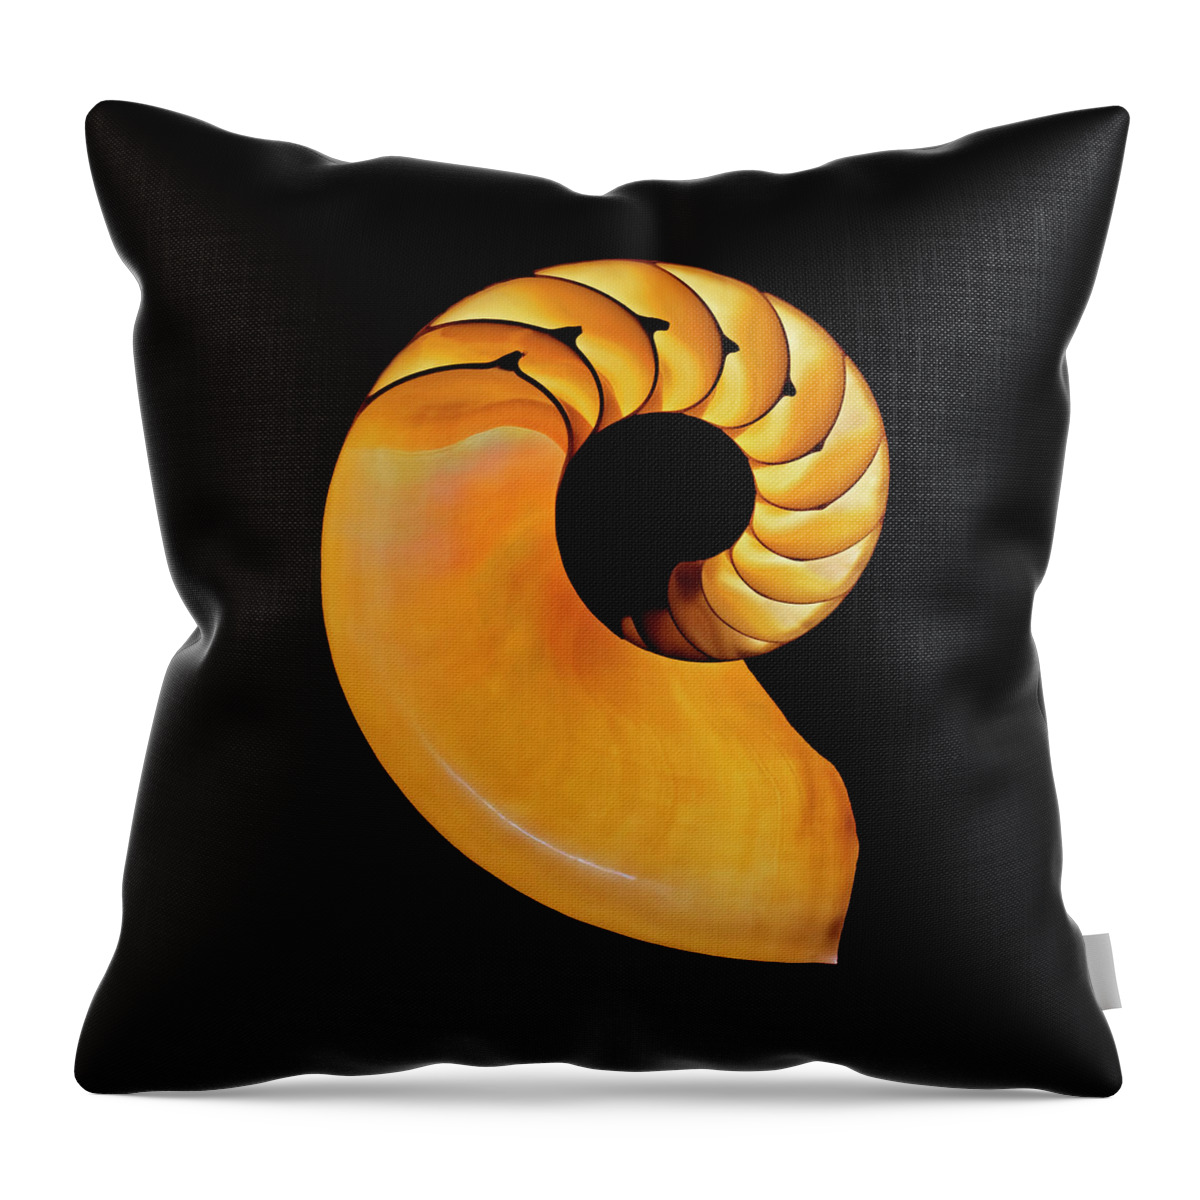 Nautilus Throw Pillow featuring the photograph Nautilus by Wes and Dotty Weber